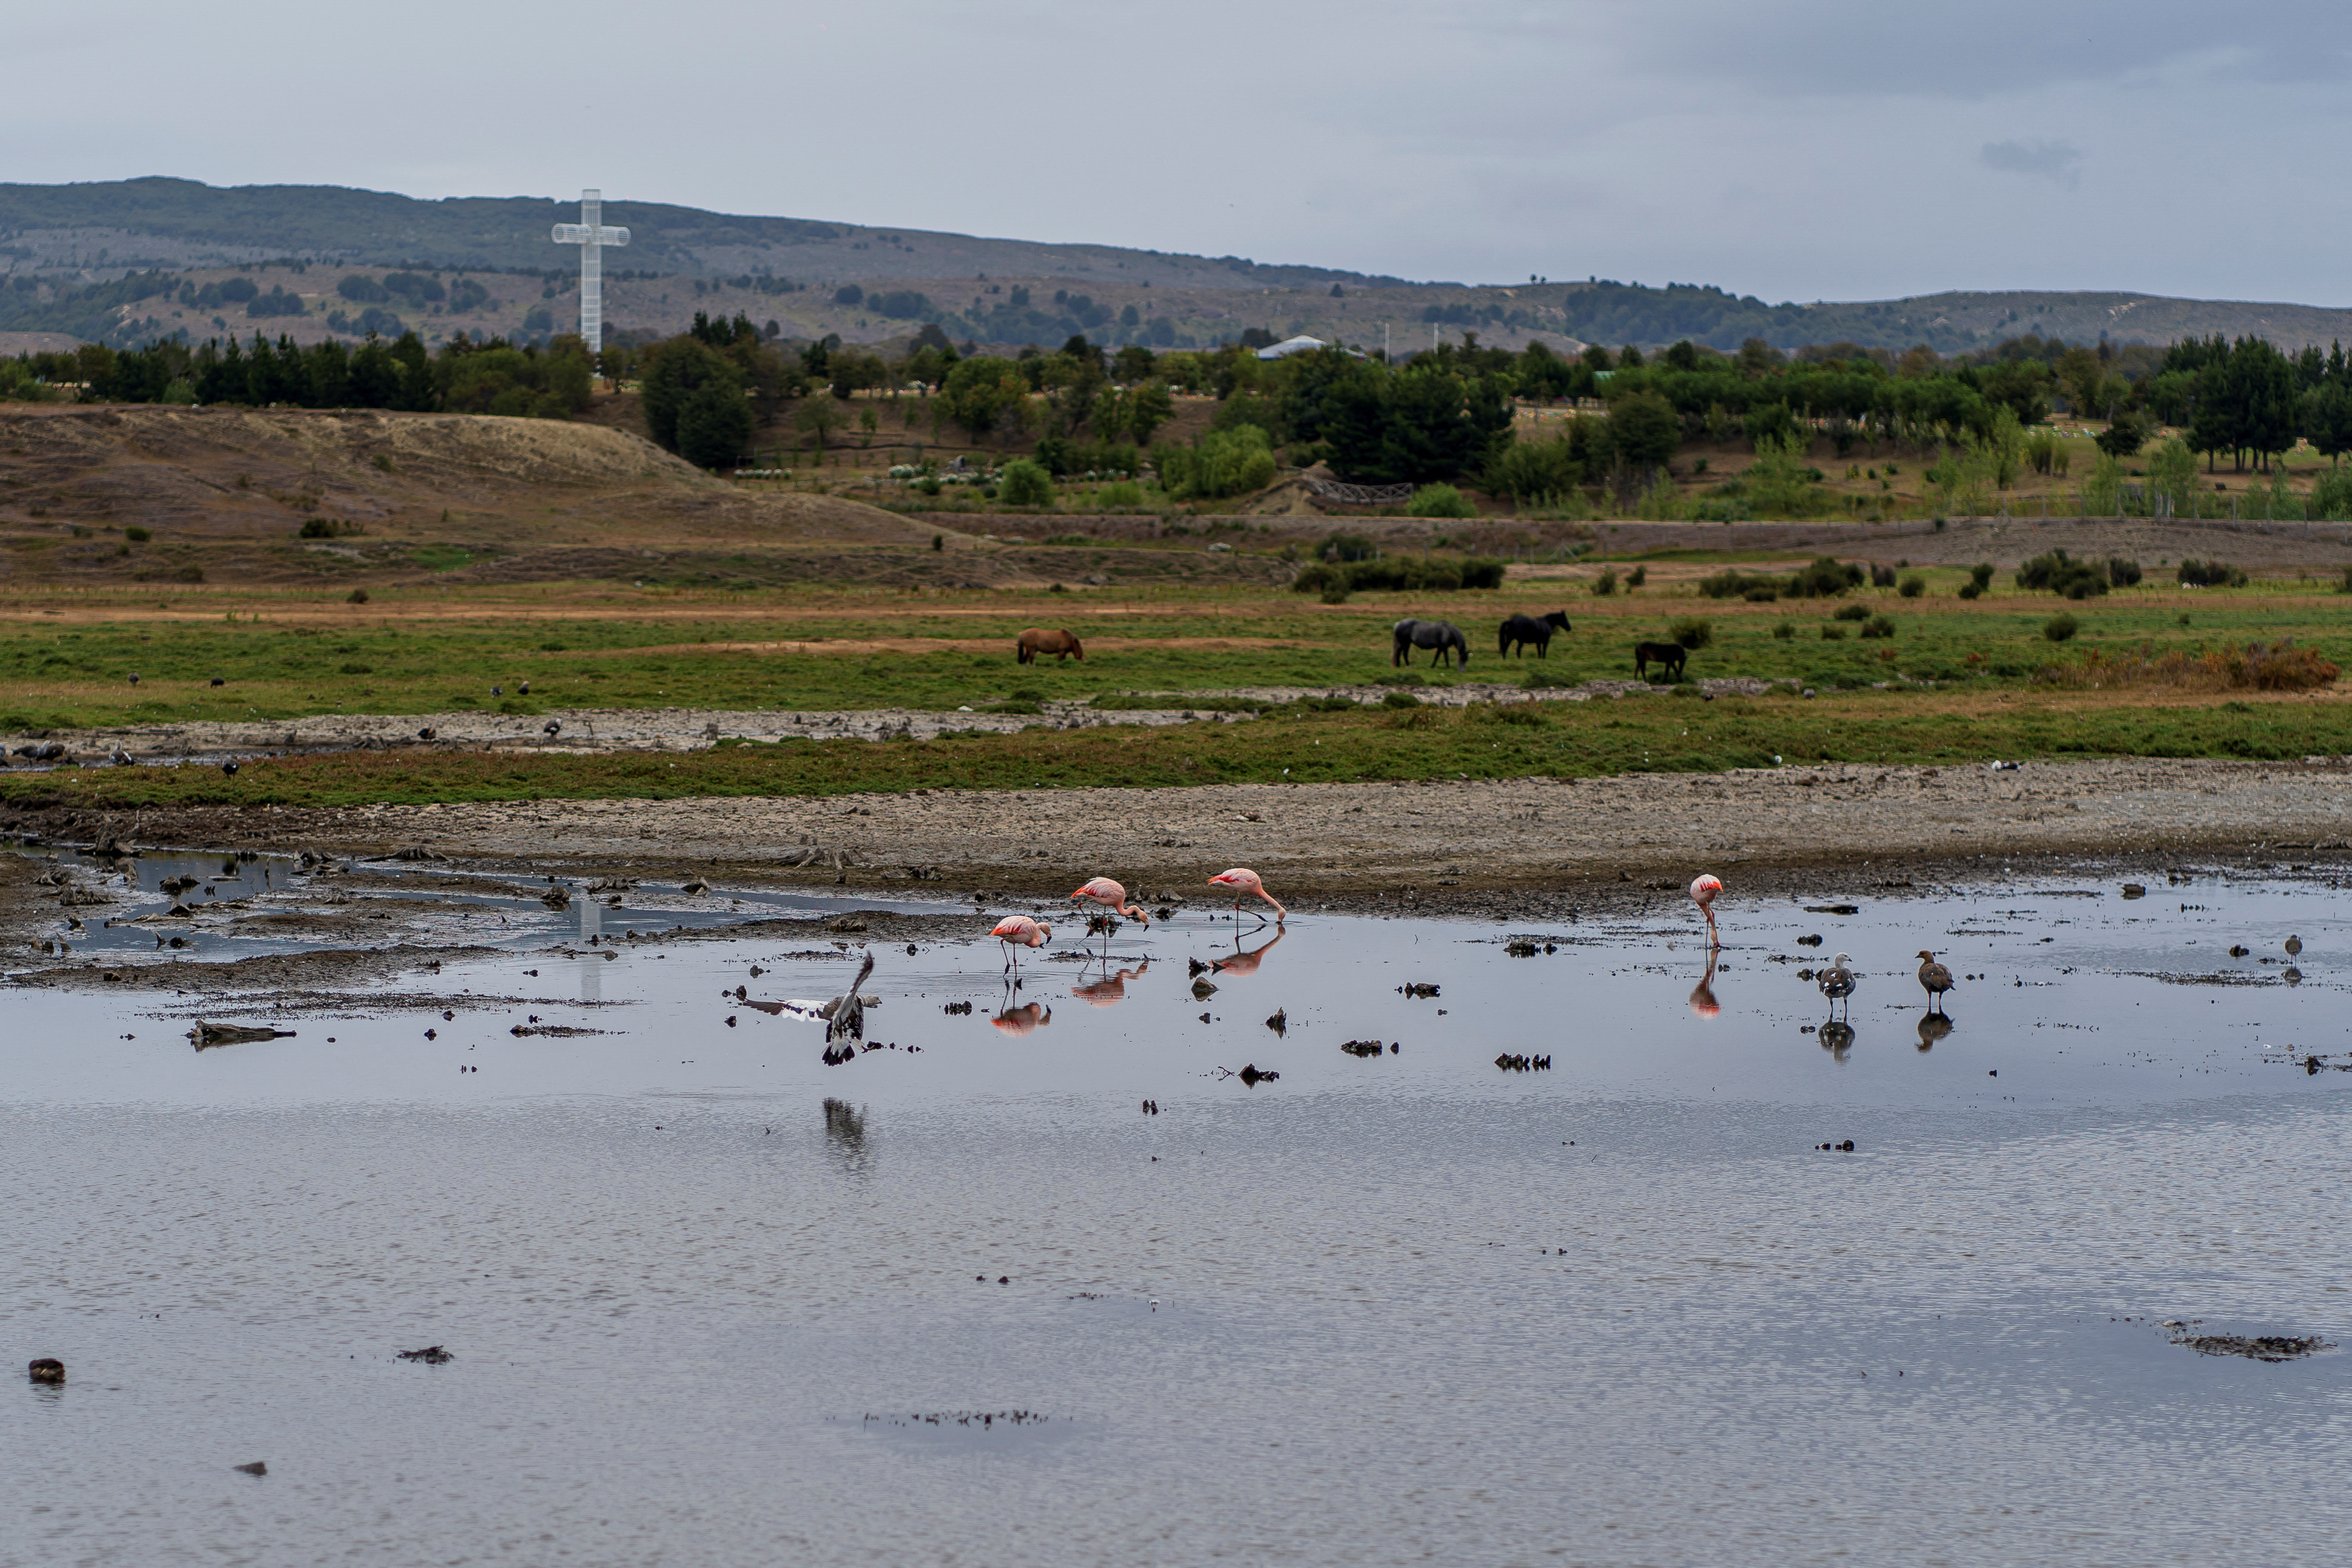 A view of flamingoes and horses on the wetland Humedal Tres Puentes, in Punta Arenas